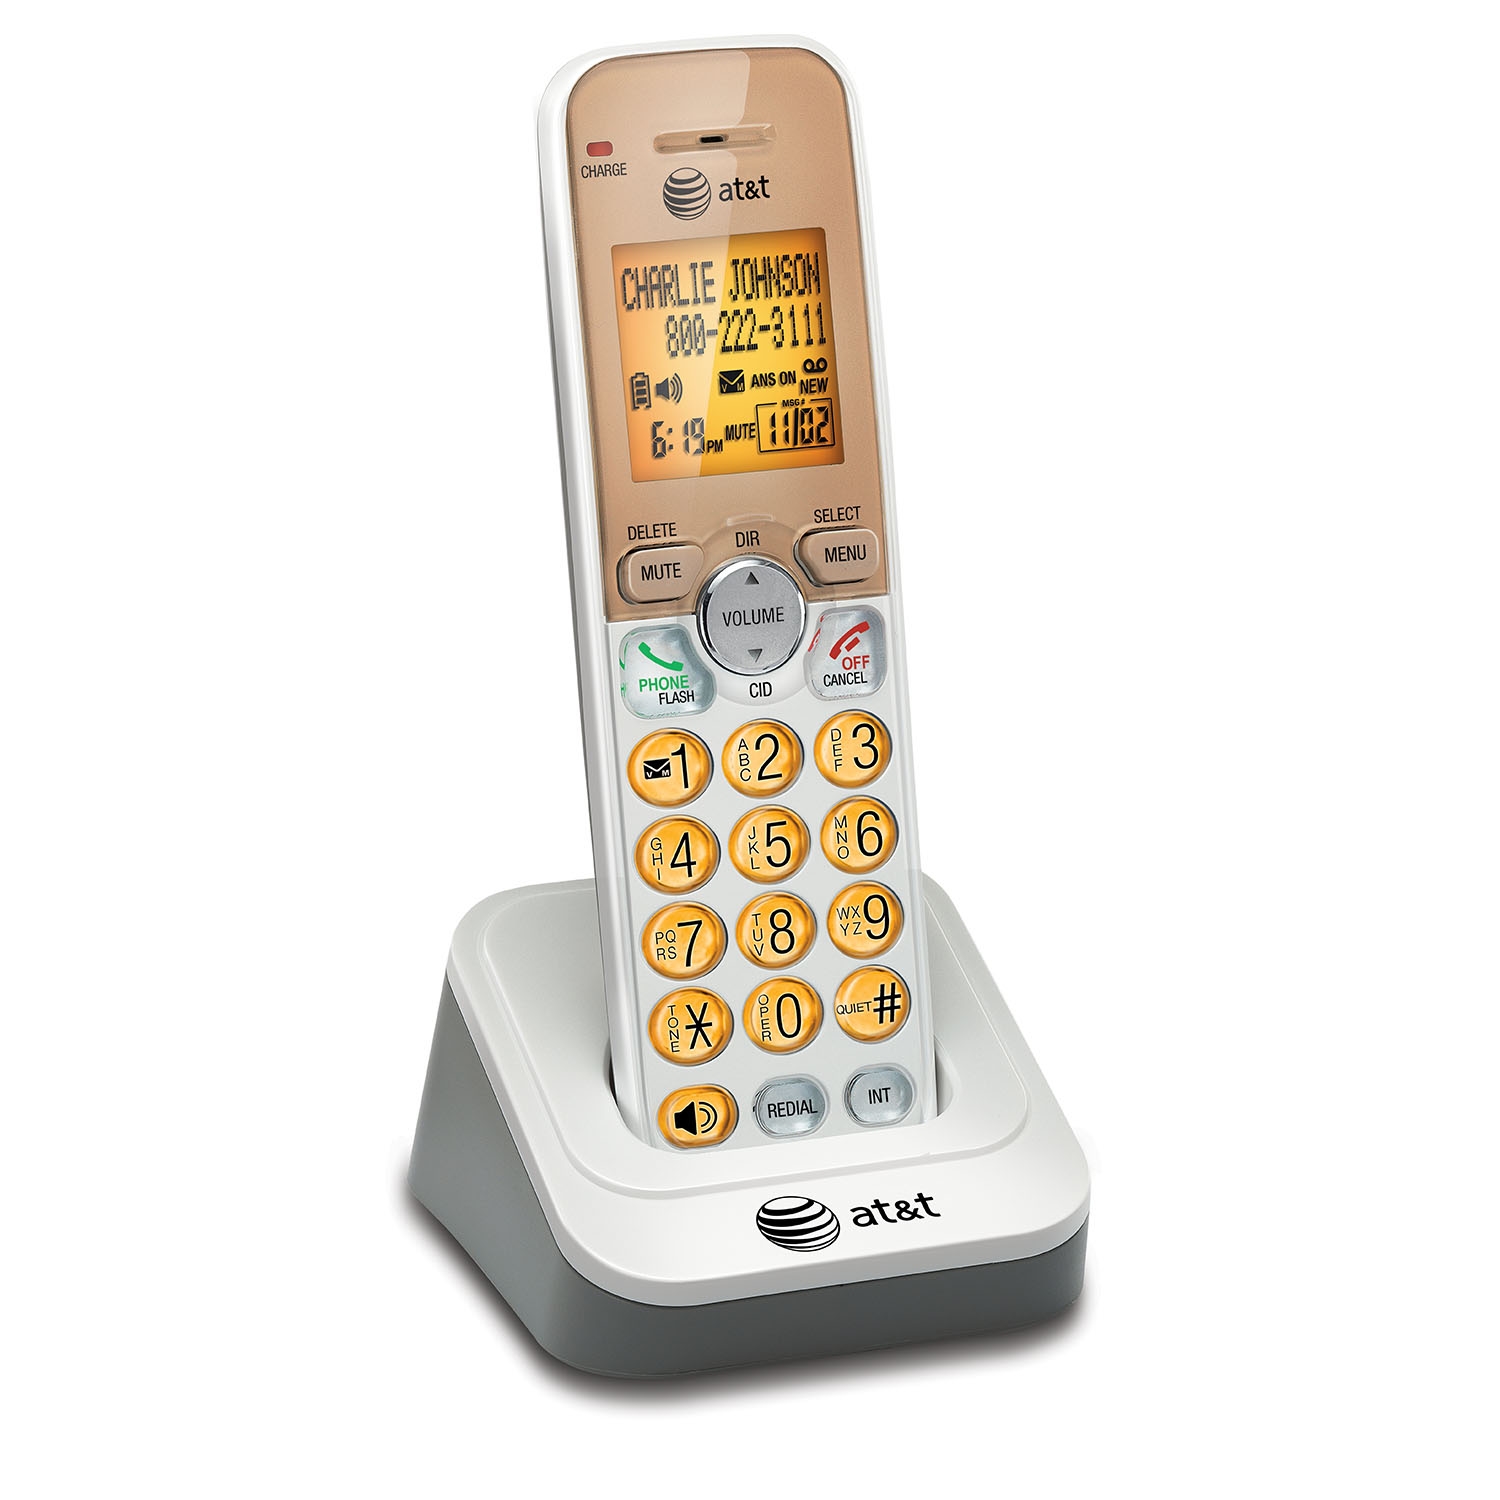 5 handset cordless answering system with caller ID/call waiting - view 5